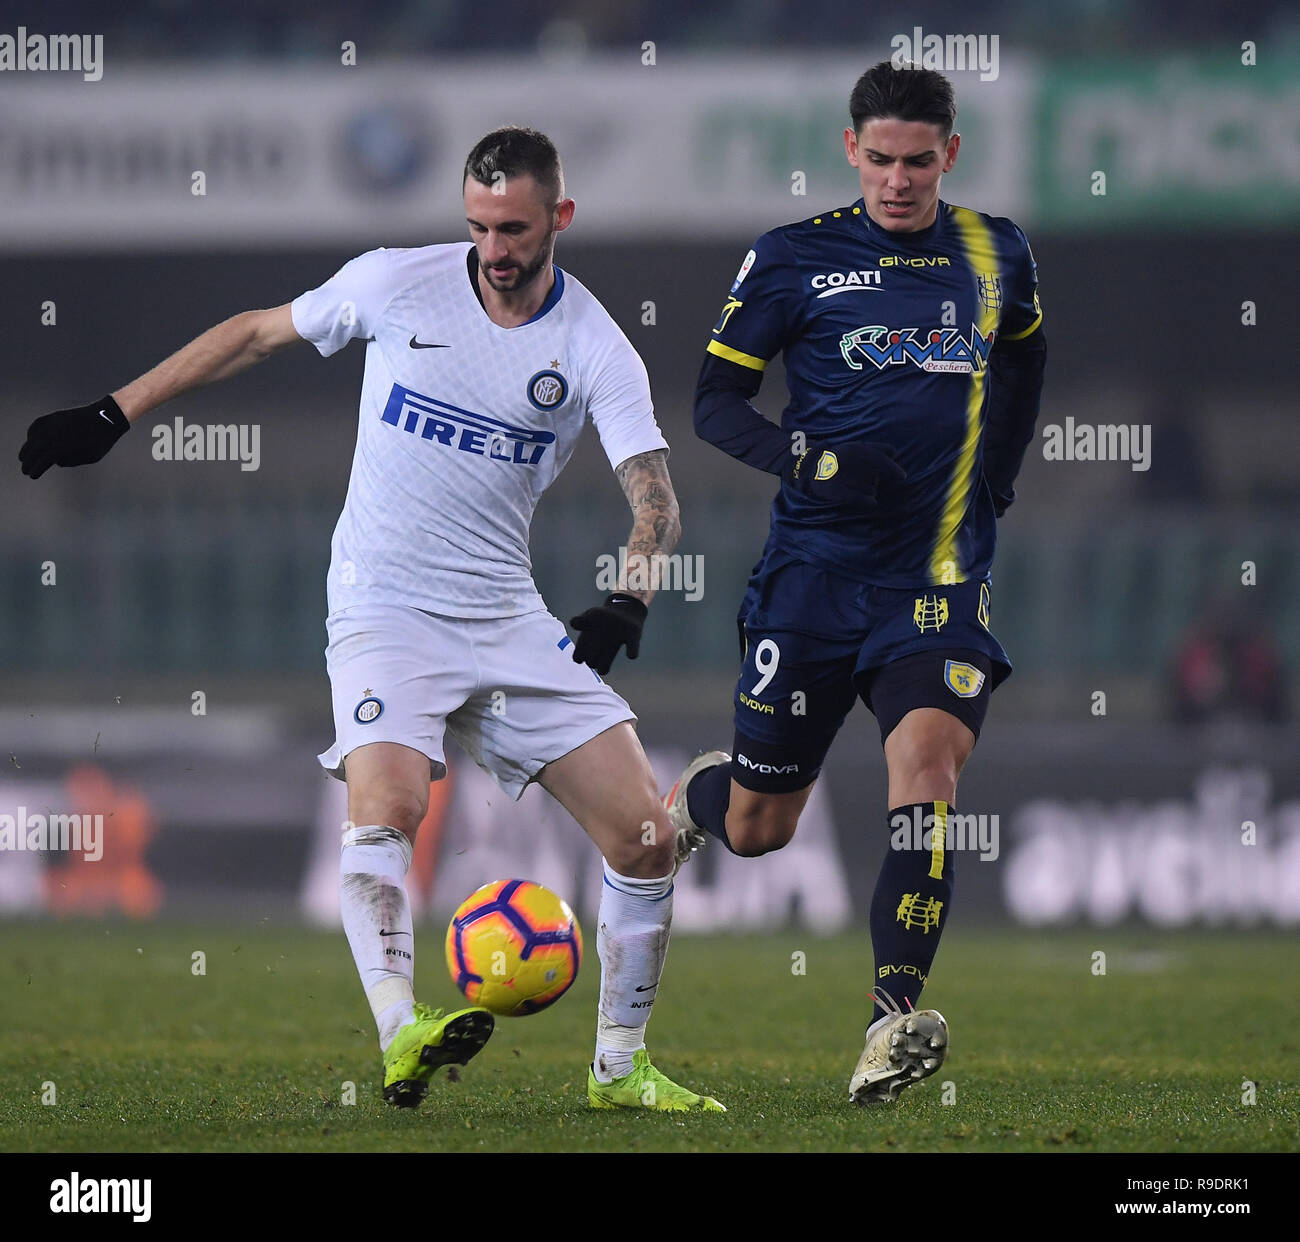 Verona, Italy. 22nd Dec, 2018. FC Inter's Marcelo Brozovic (L) vies with Chievo  Verona's Mariusz Stepinski during the Serie A soccer match between FC Inter  and Chievo Verona in Verona, Italy, Dec.